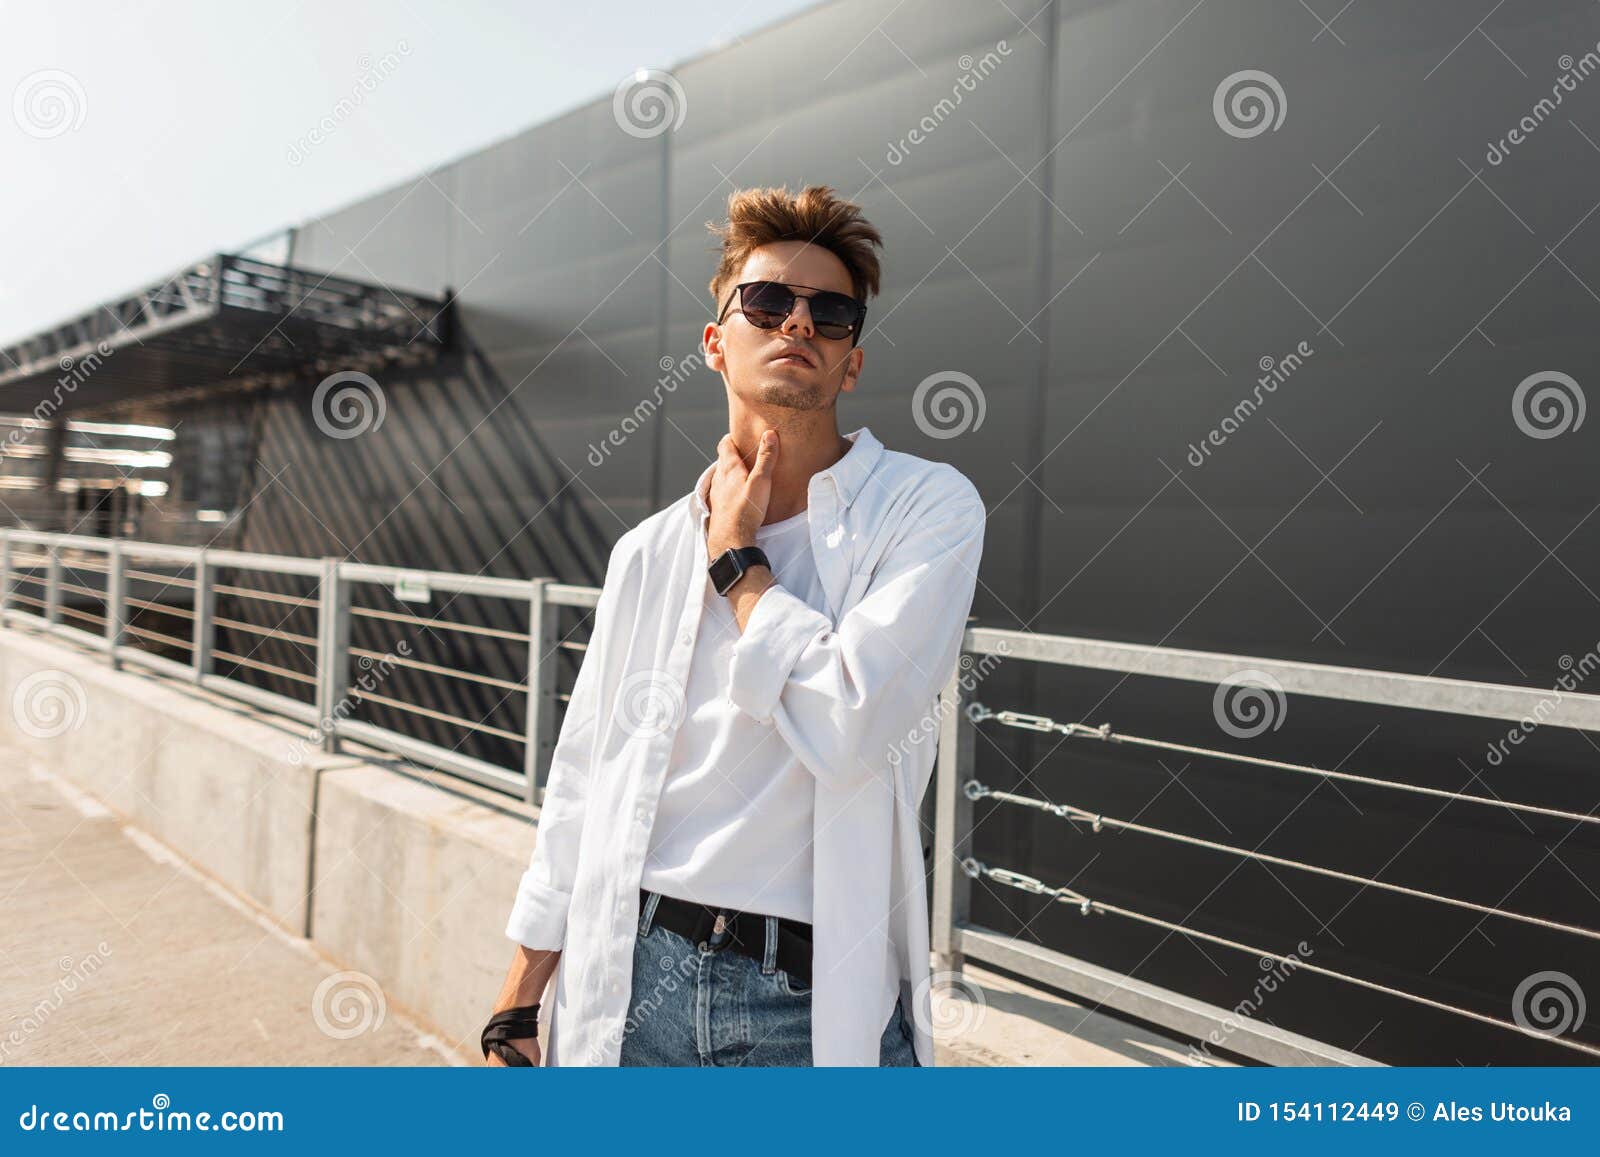 European Stylish Young Hipster Man in Fashionable Summer Clothes in Black  Sunglasses with a Fashionable Hairstyle Stands Stock Image - Image of  hairstyle, city: 154112449